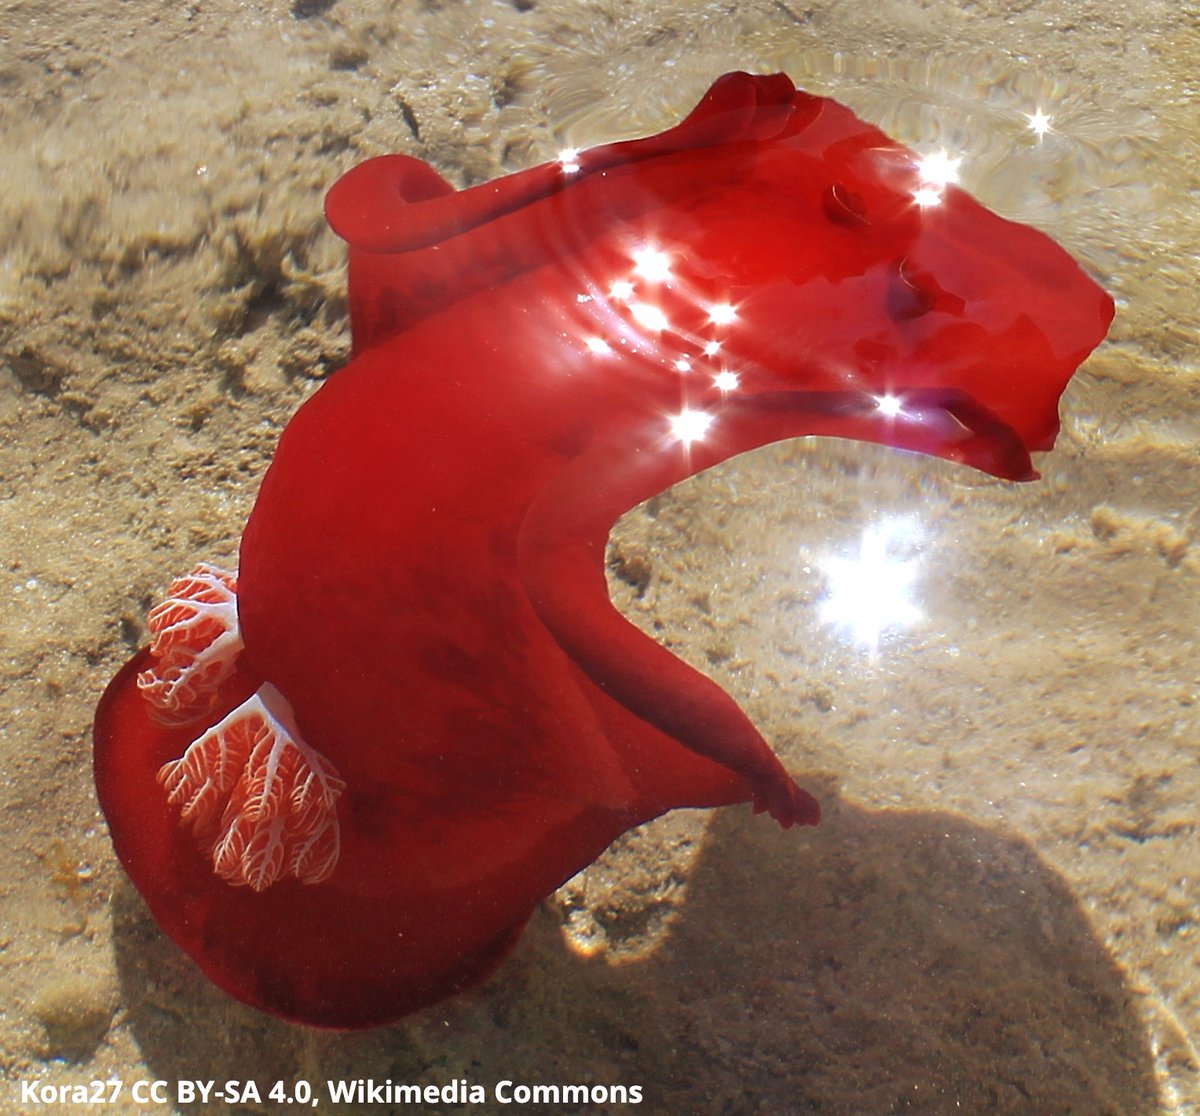 Have you ever spotted the Spanish dancer? This marine gastropod swirls in the water when threatened—with its appendages flailing, reminiscent of the movements of a flamenco dancer’s skirts! It can be found in tropical waters like those off of Australia and Hawaii.💃